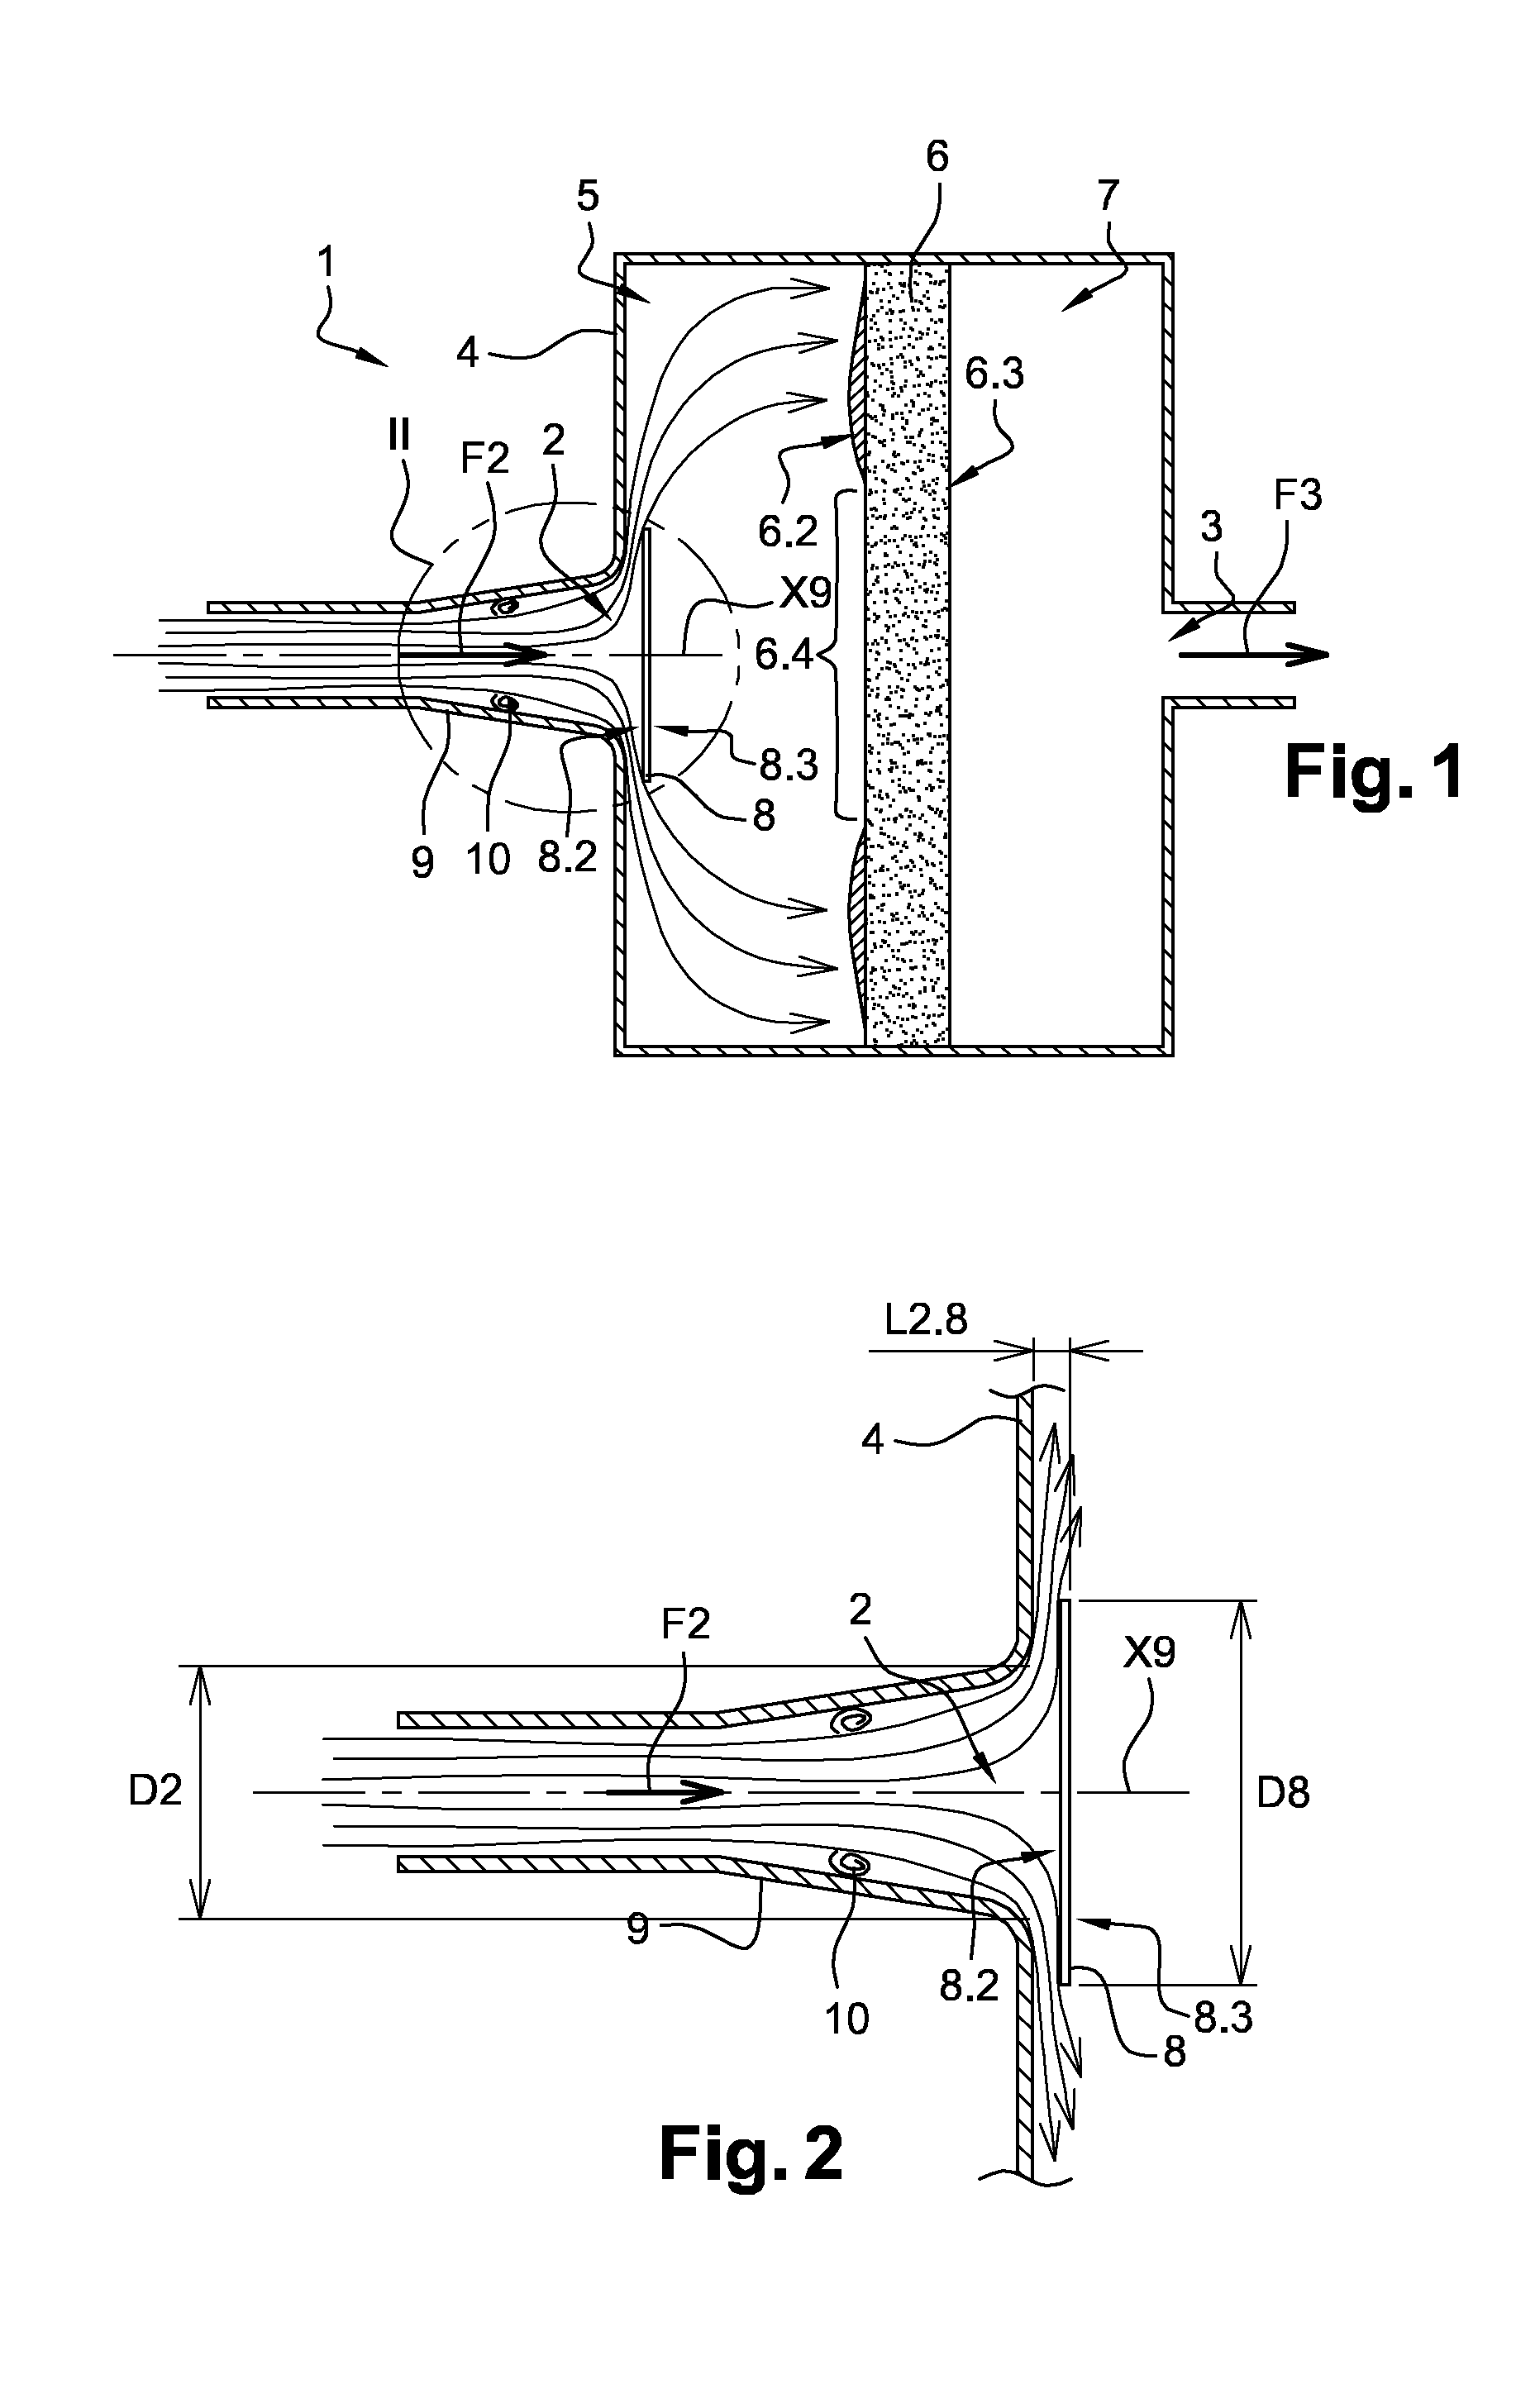 Air filtering device in an air intake line of an internal combustion engine